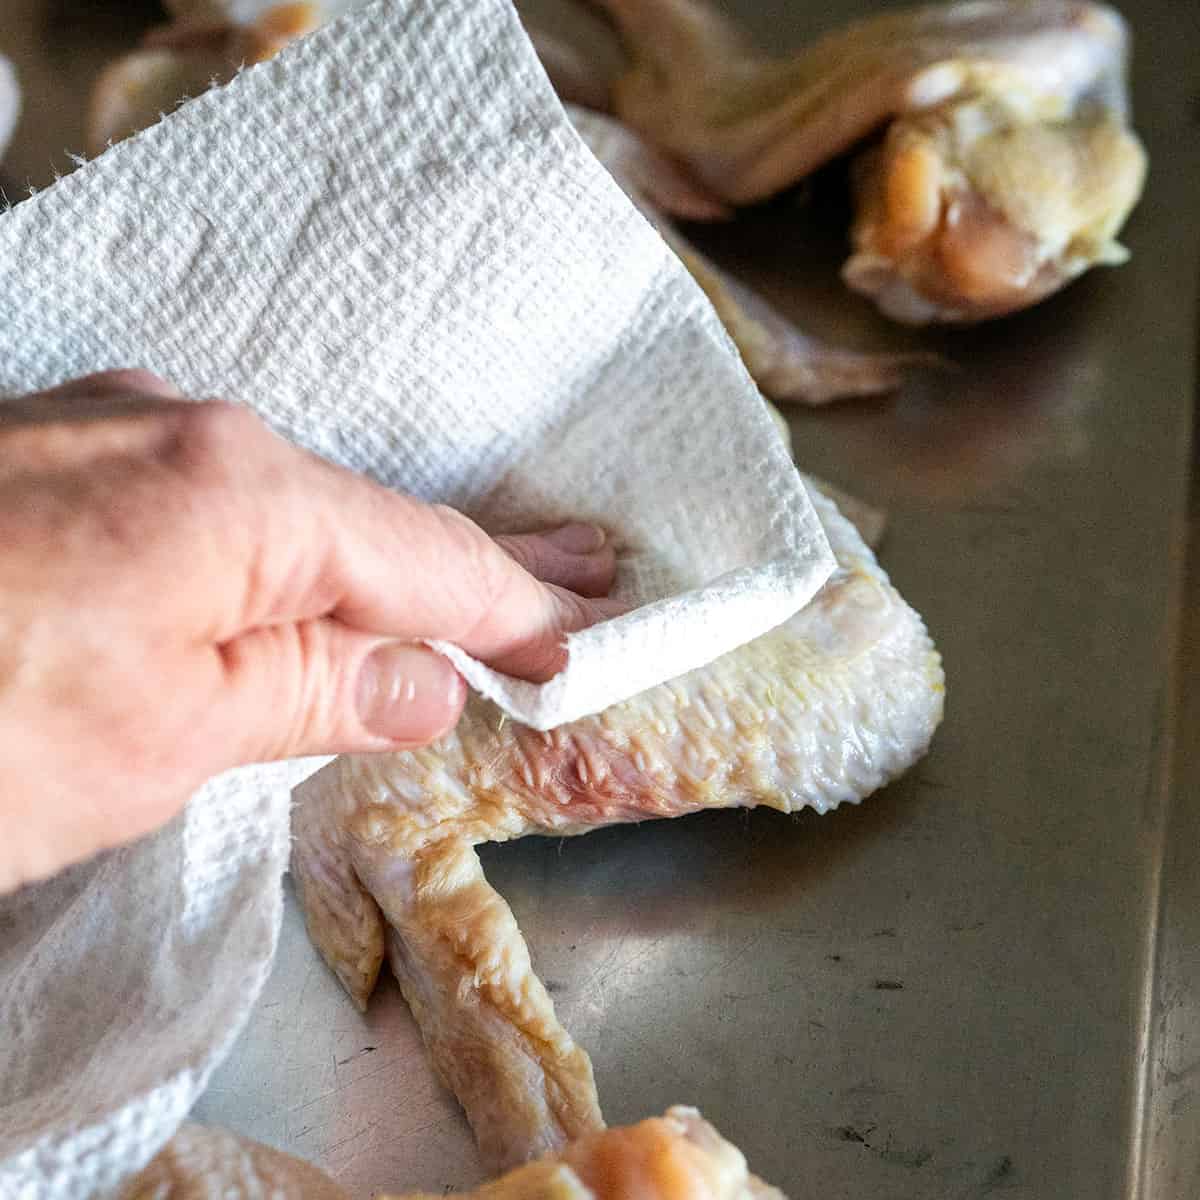 patting a chicken wing dry with a paper towel.